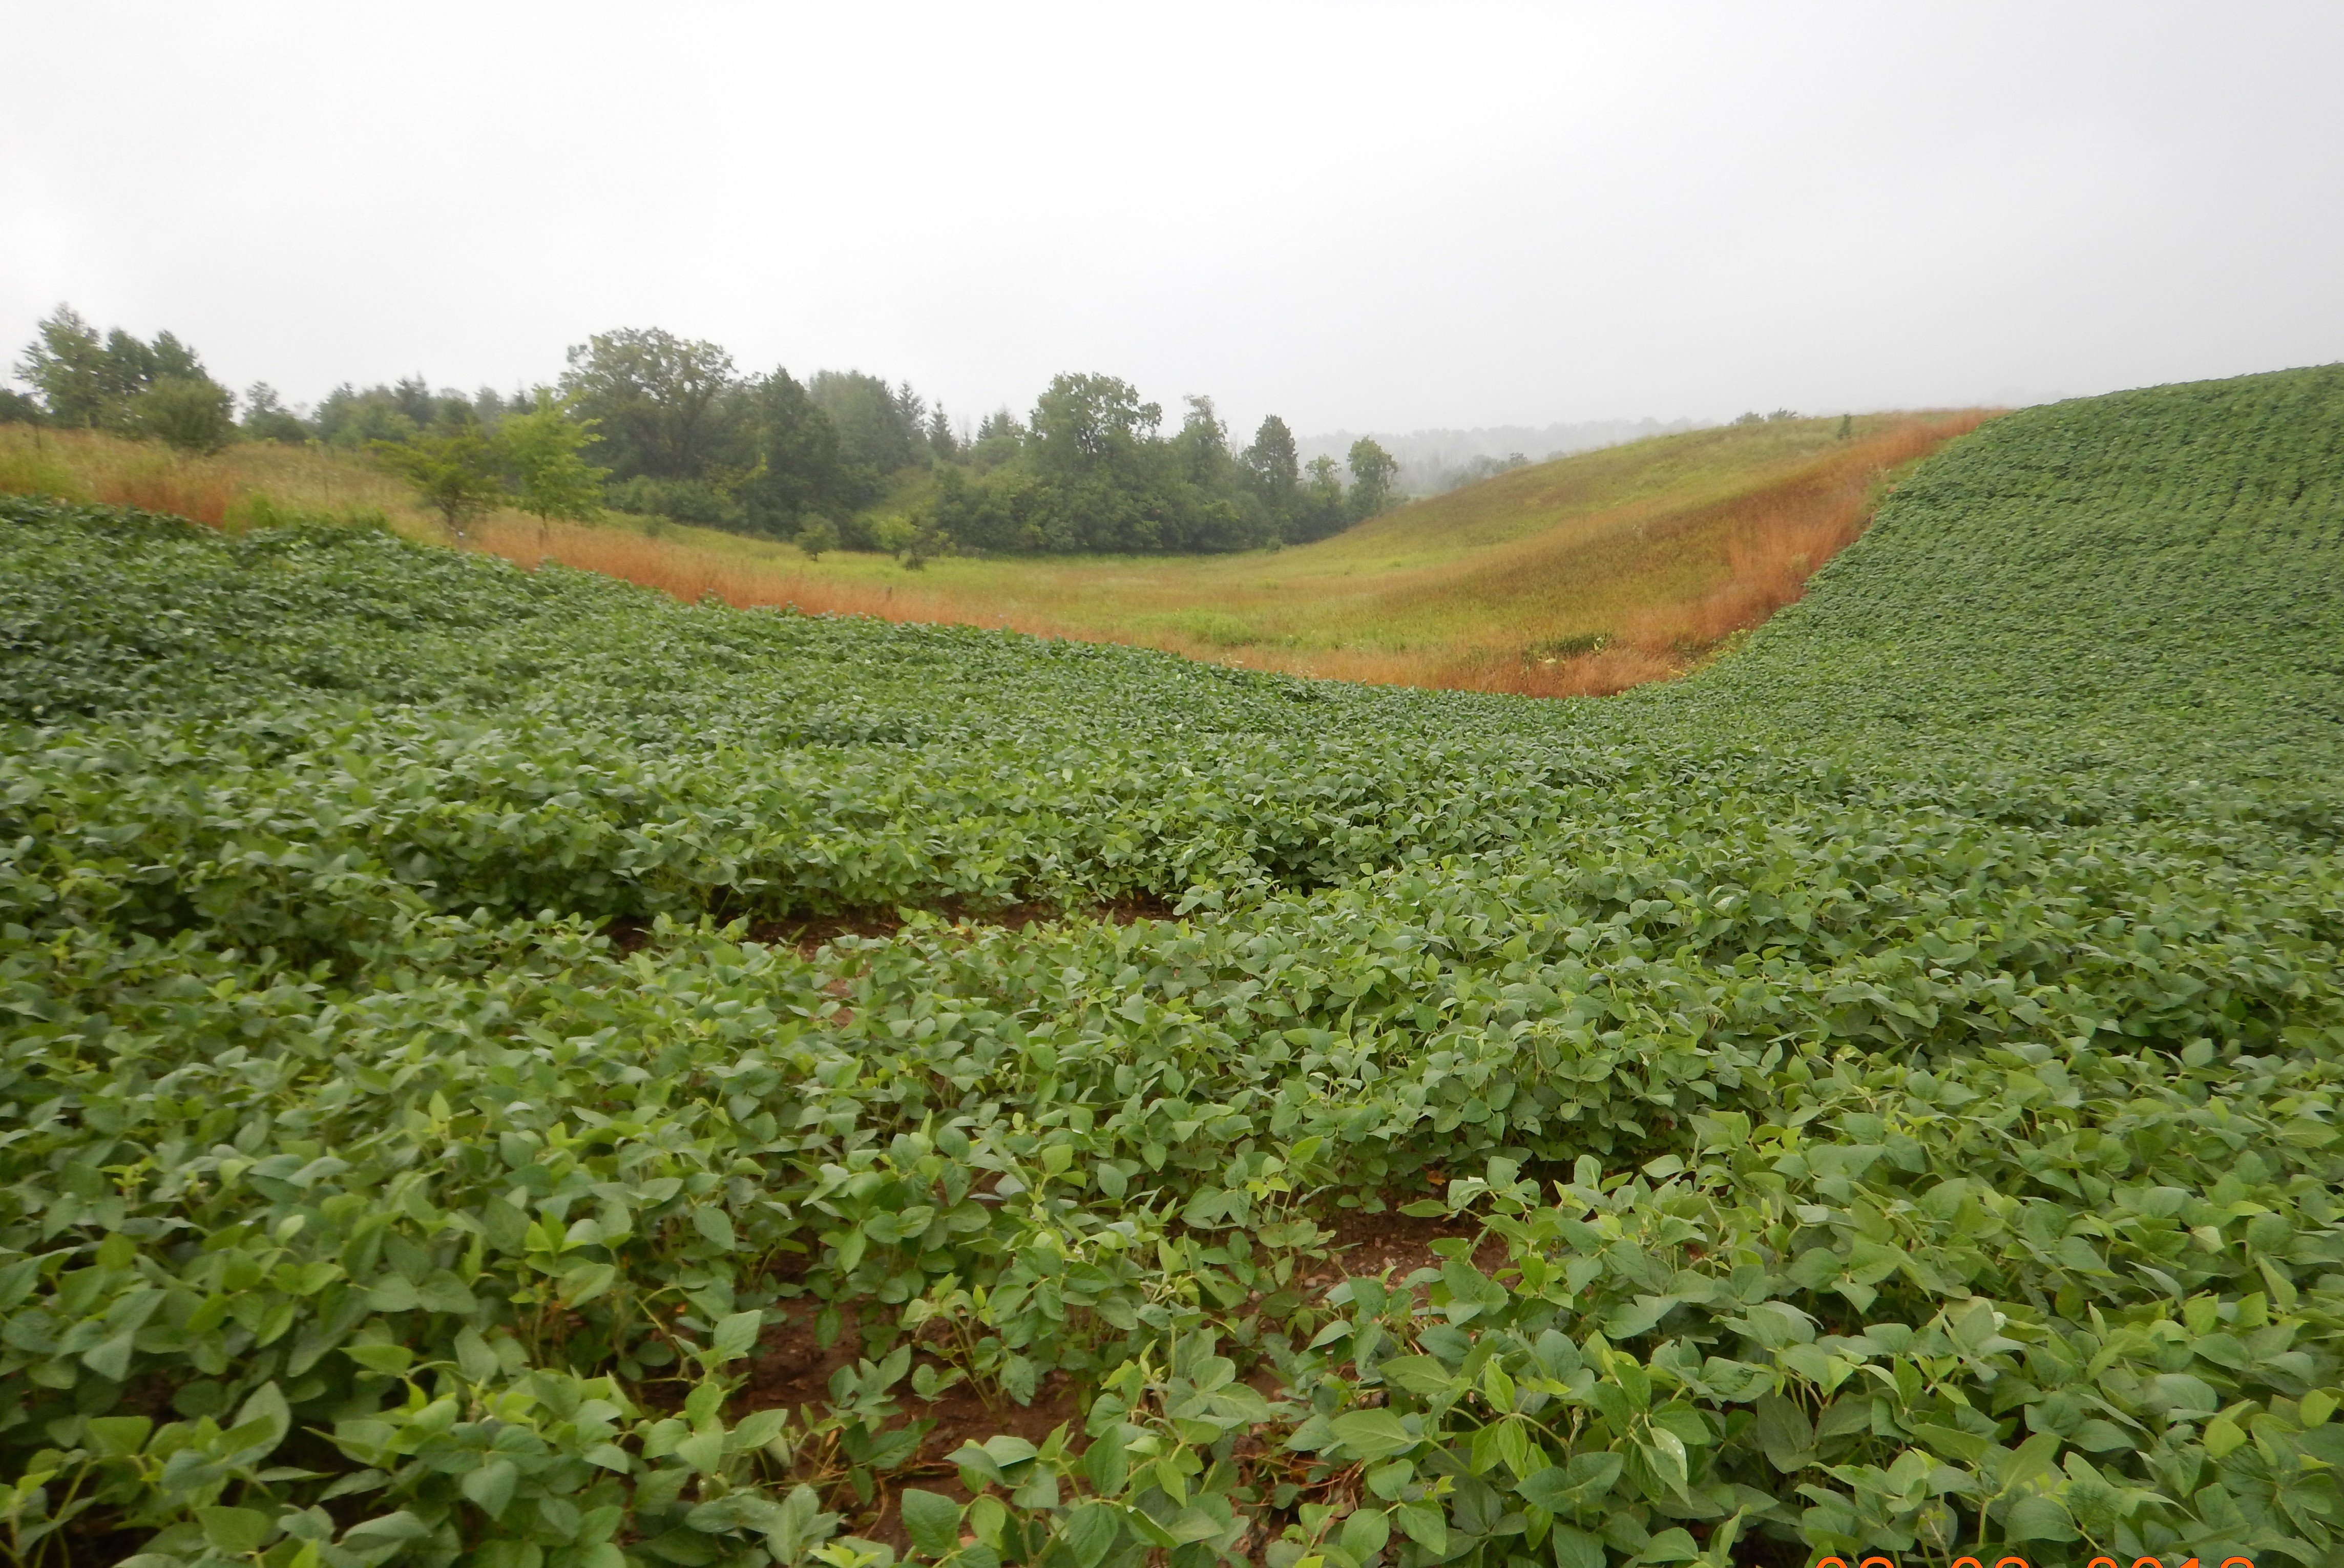 Common field crop production on steeply sloping lands.